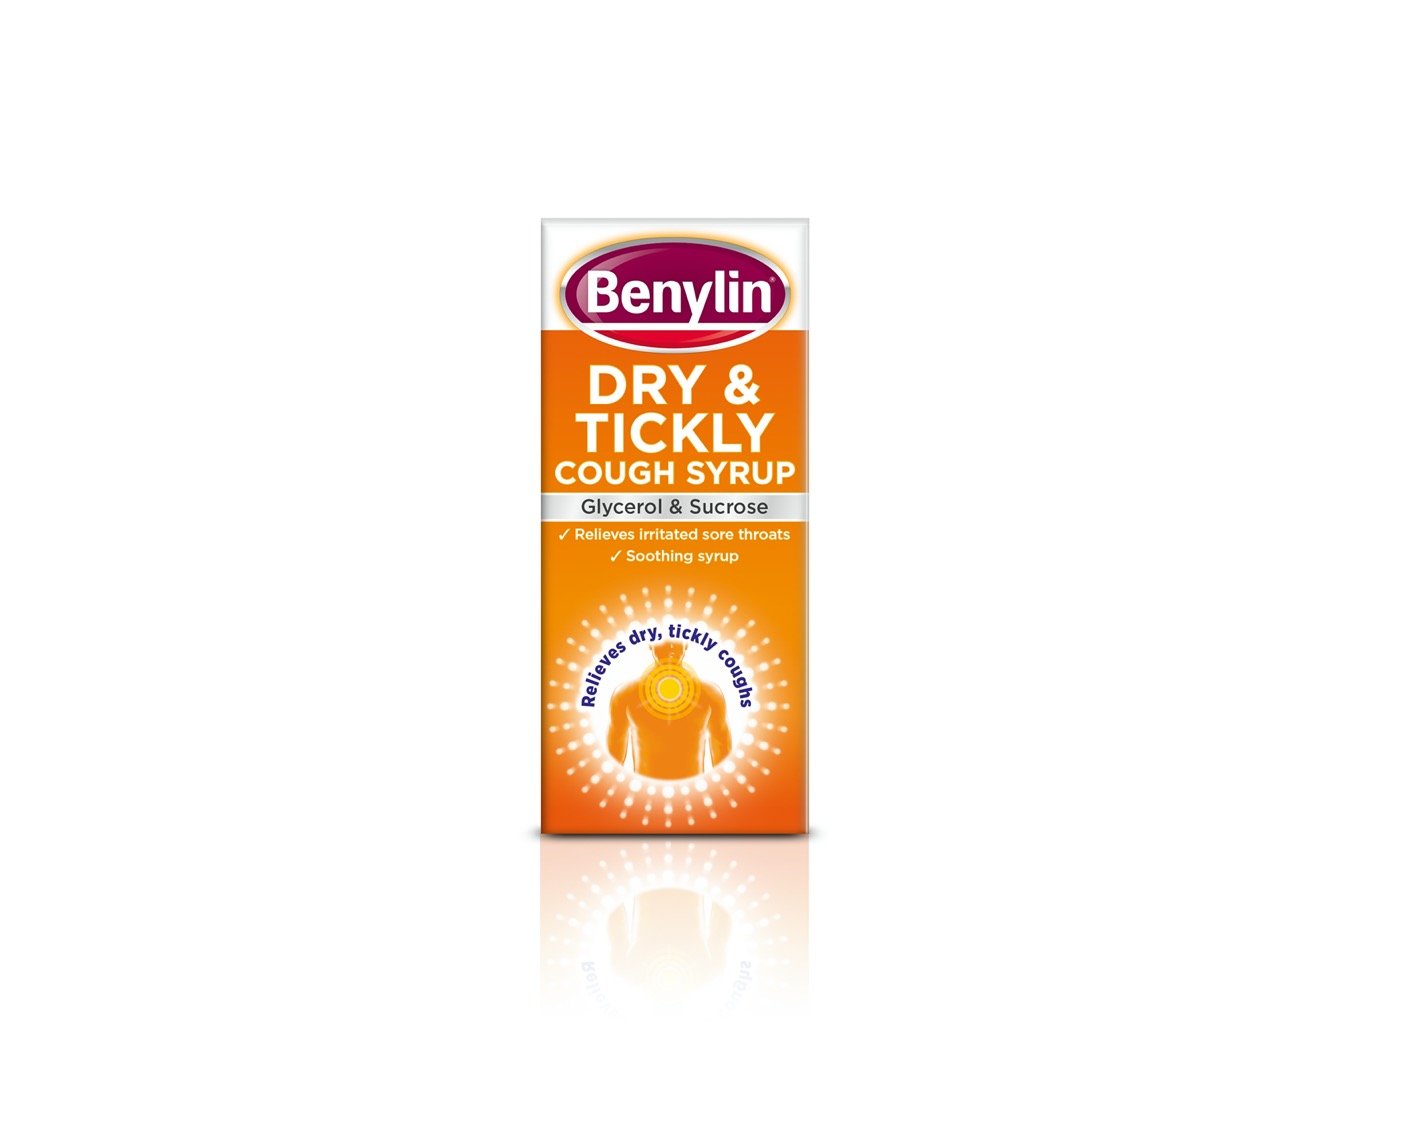 Benylin® dry and tickly pack image